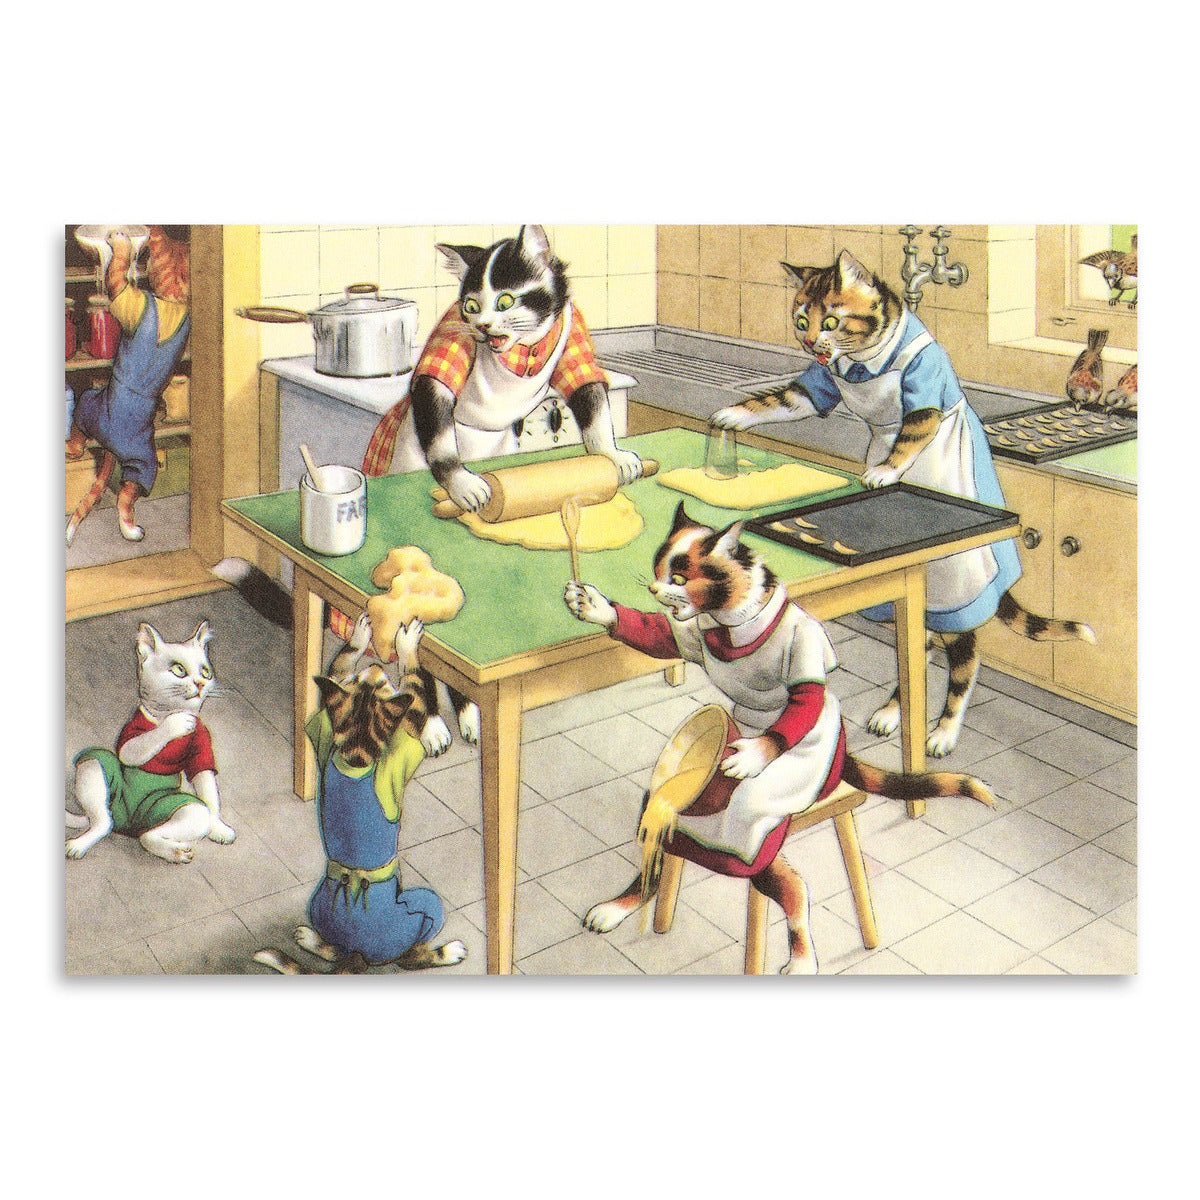 Cooking With The Crazy Cats Family by Found Image Press Art Print - Art Print - Americanflat